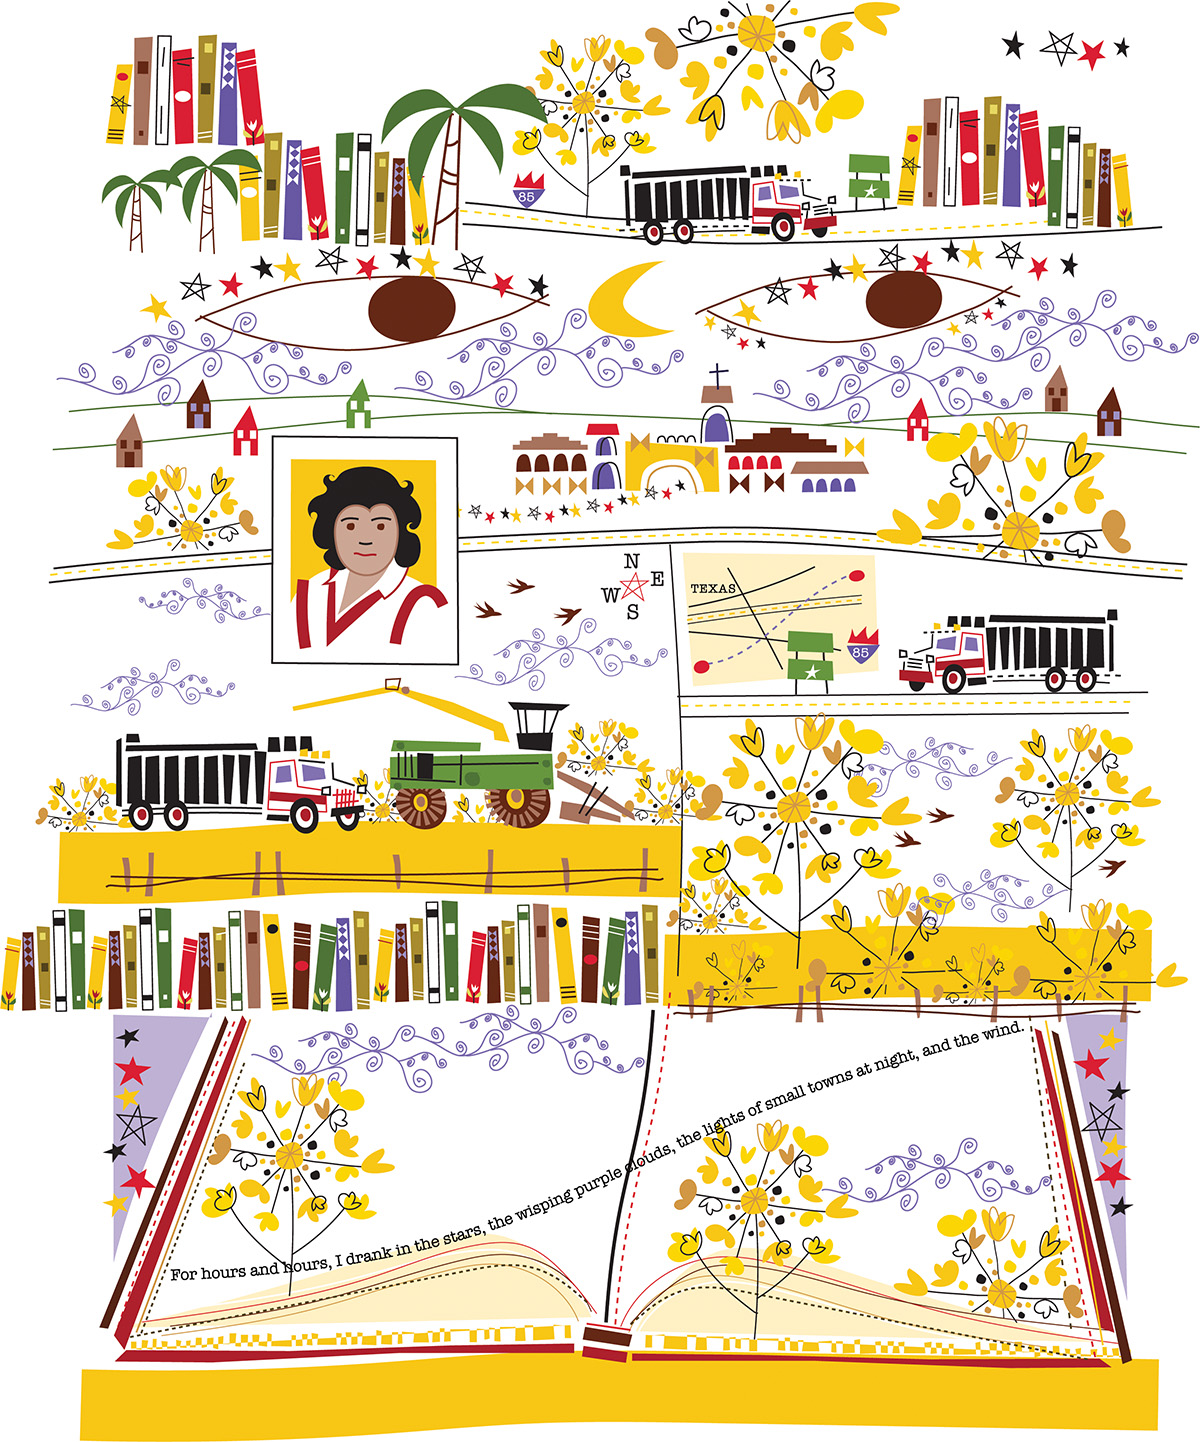 An illustration of whimsical travel imagery, including books, trucks, highway signs, farm equipment and flowers